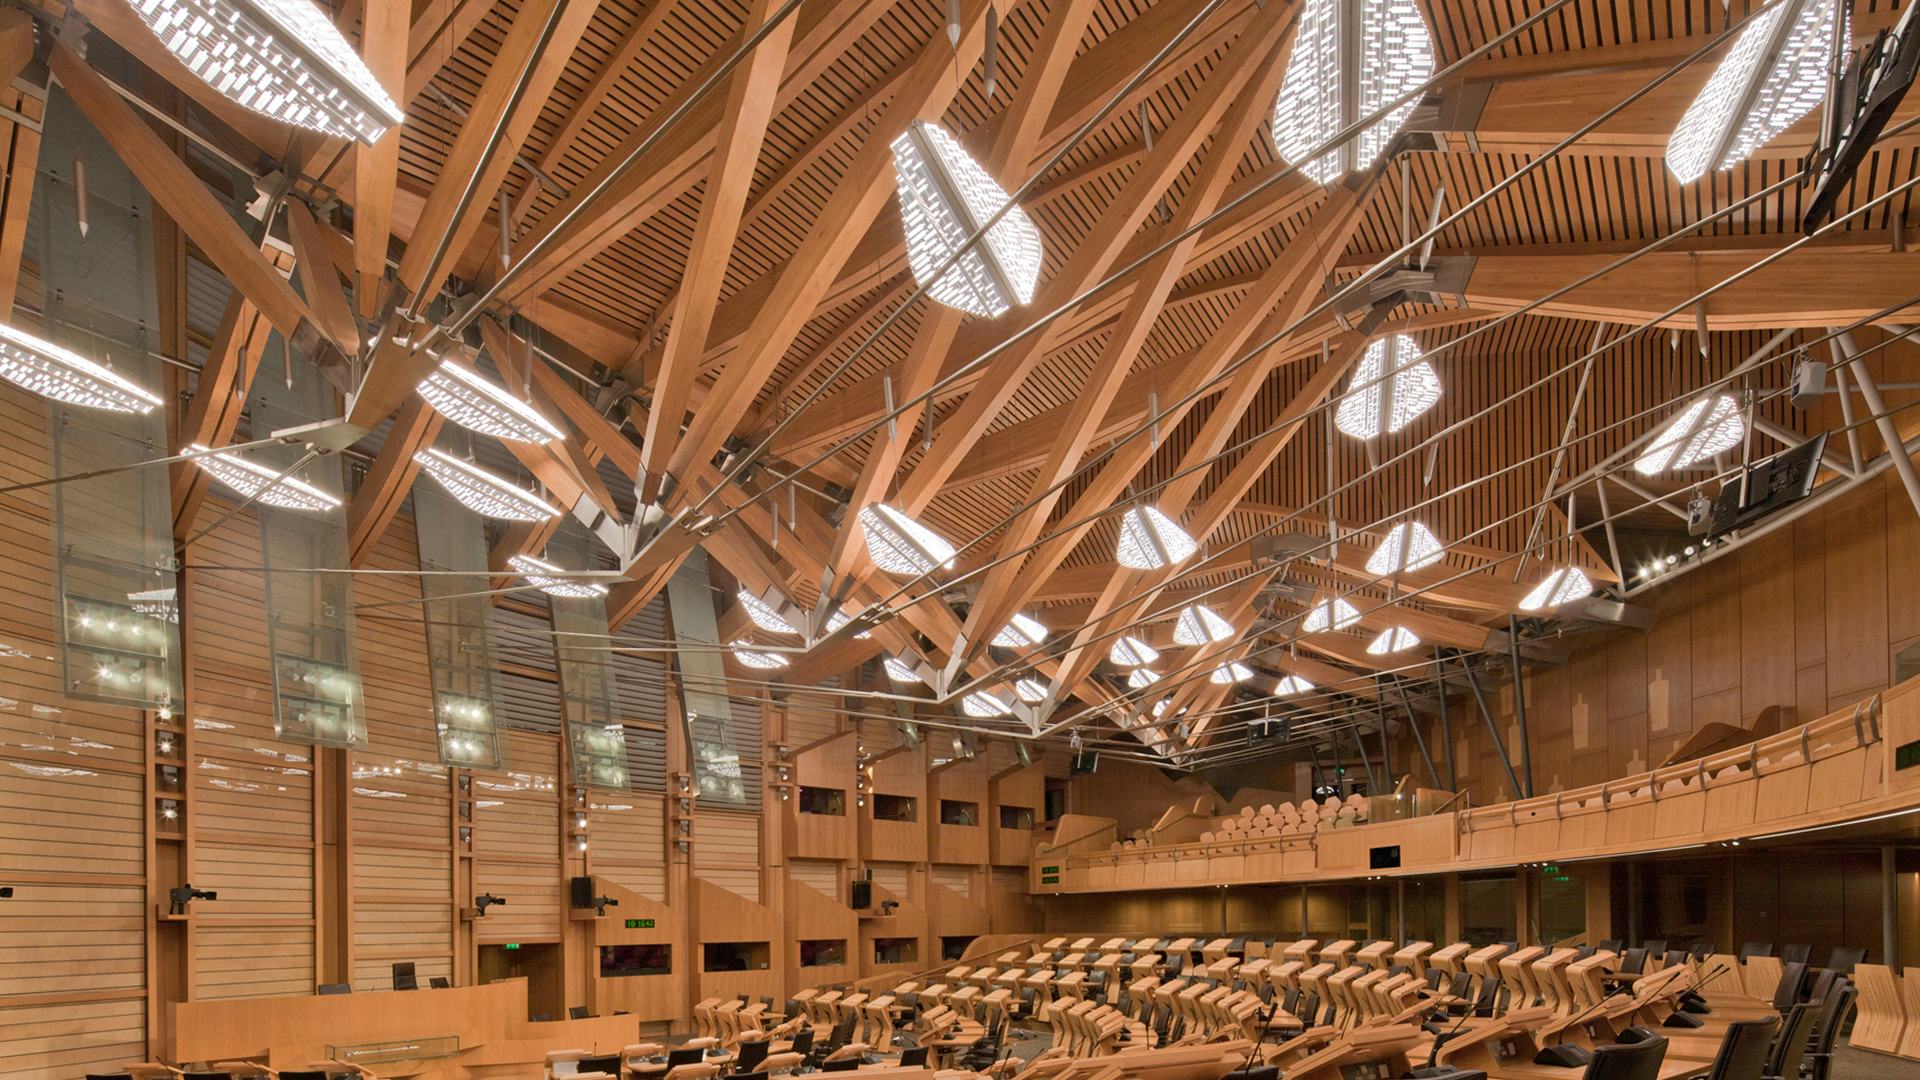 A large wooden conference hall, a wooden structure in the ceiling with a lighting design resembling floating leaves